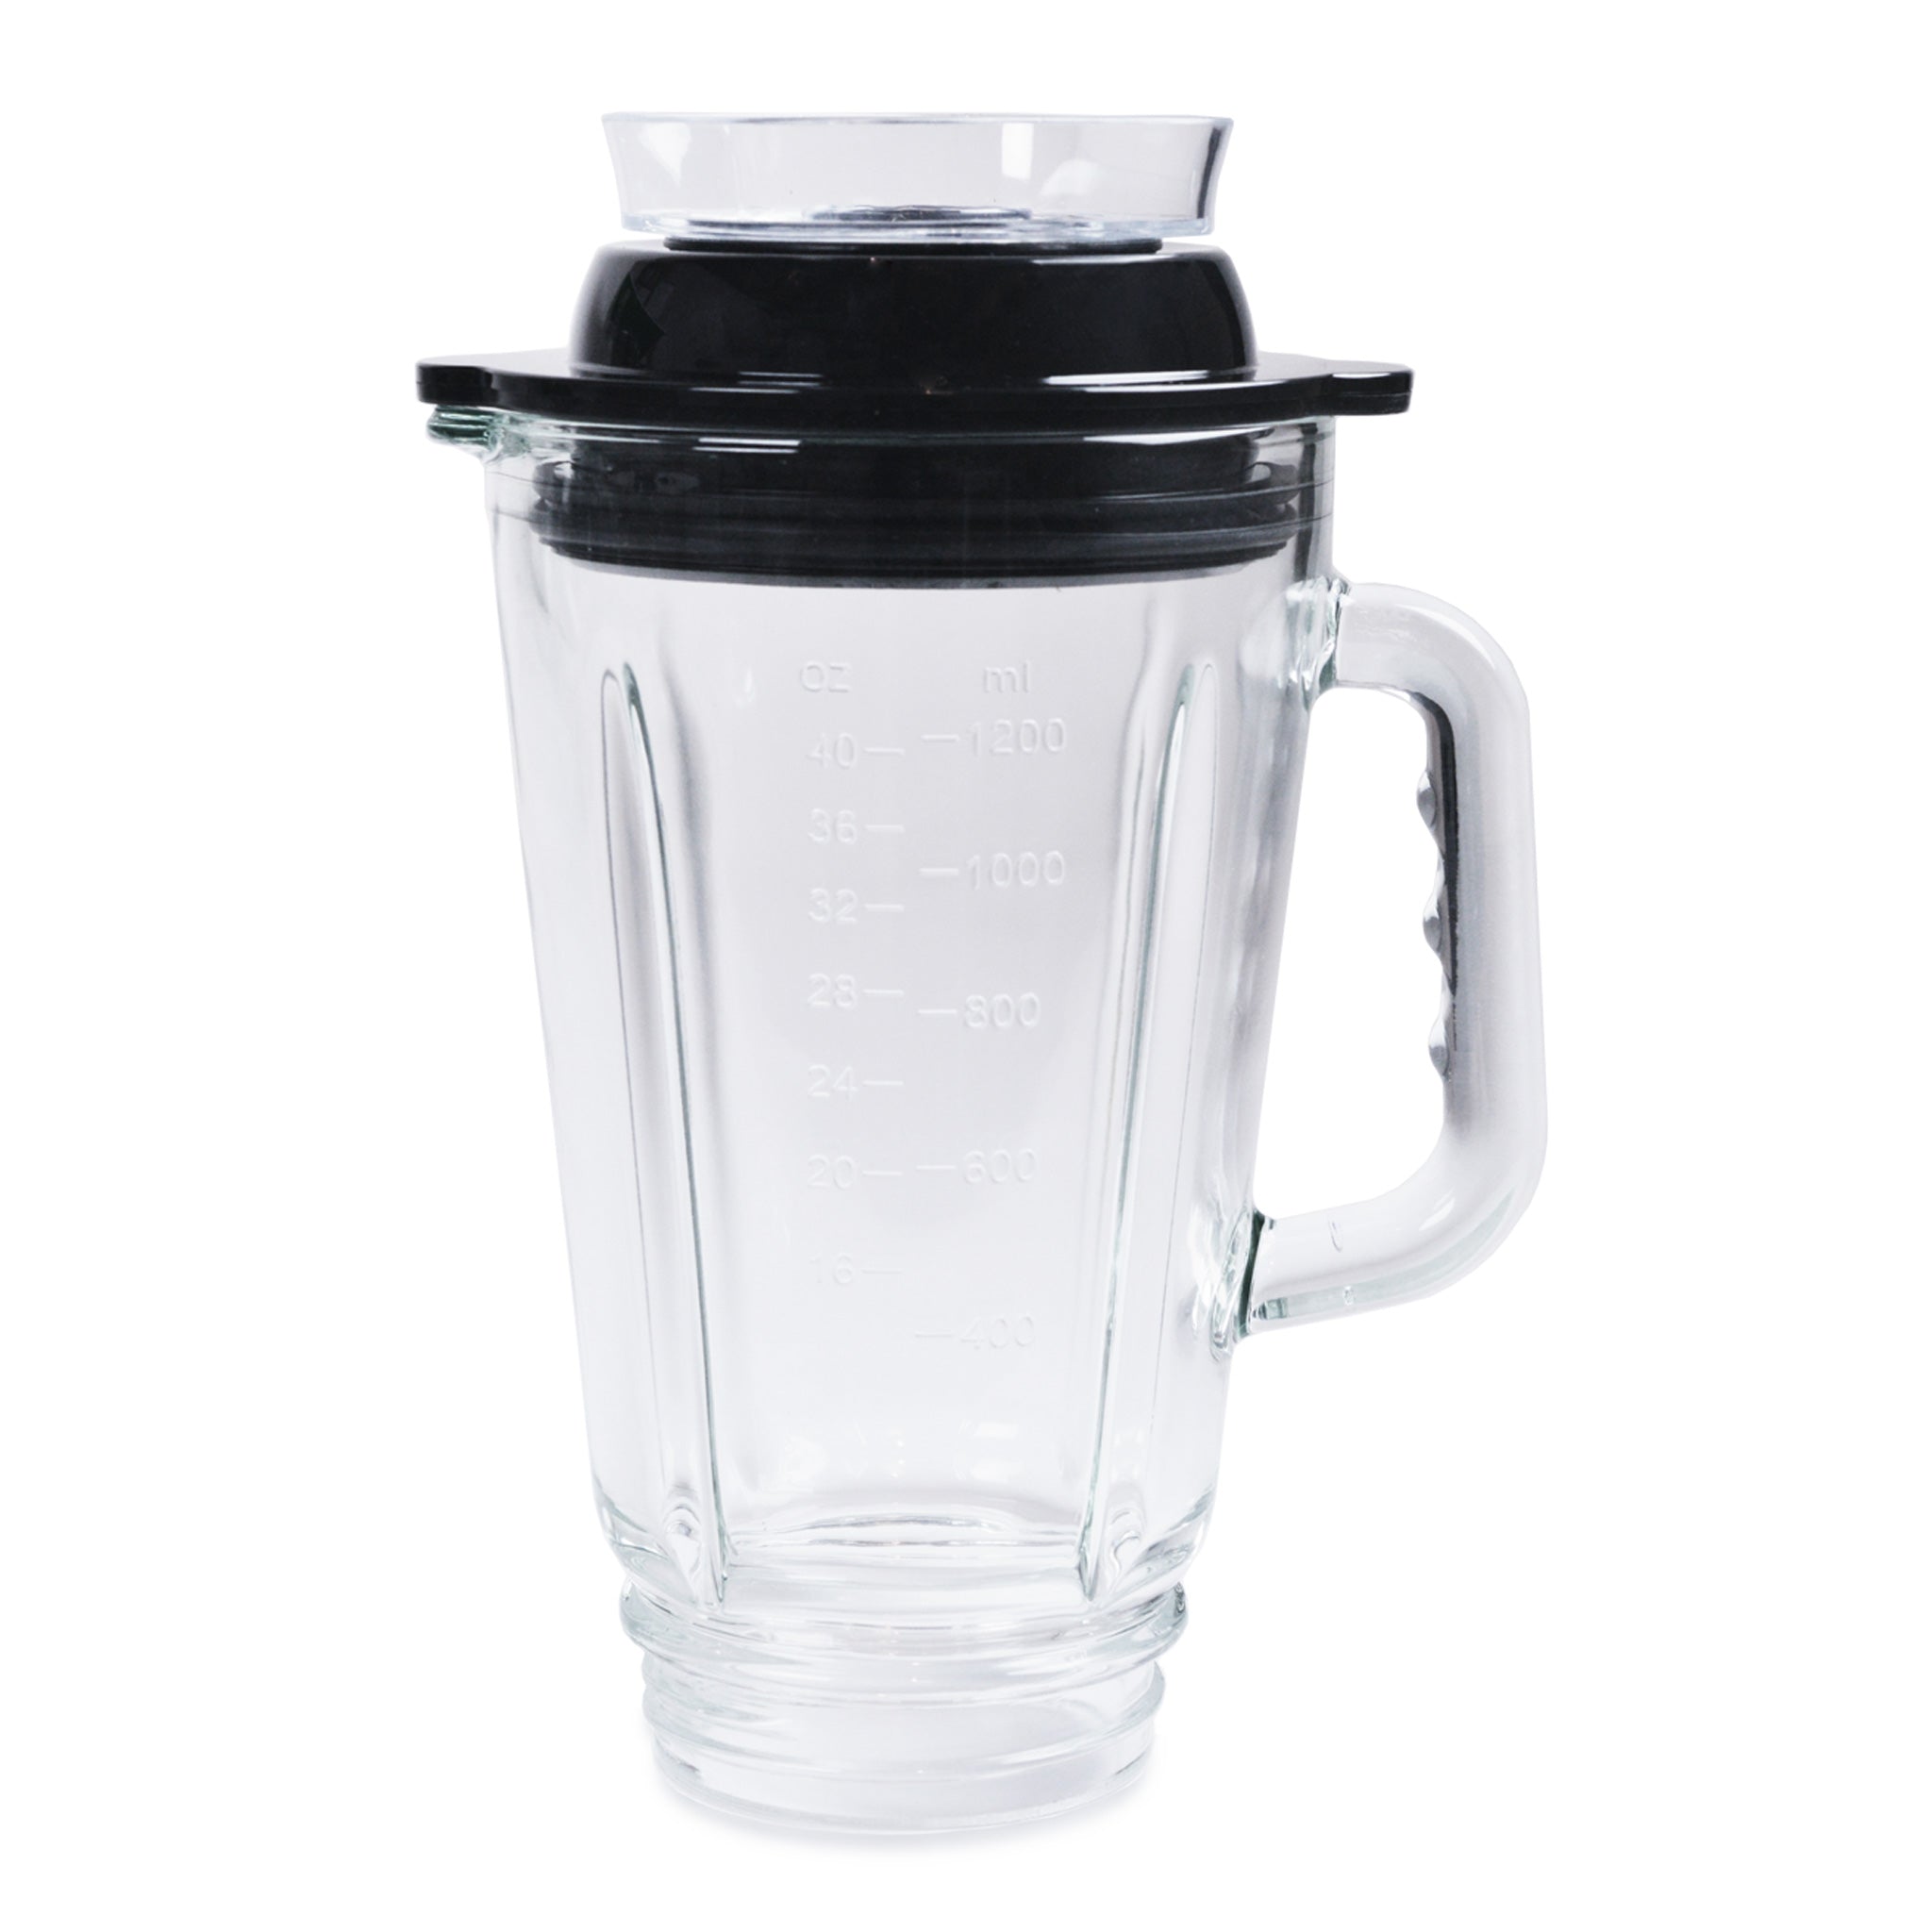 Glass Personal Blender with Vacuum